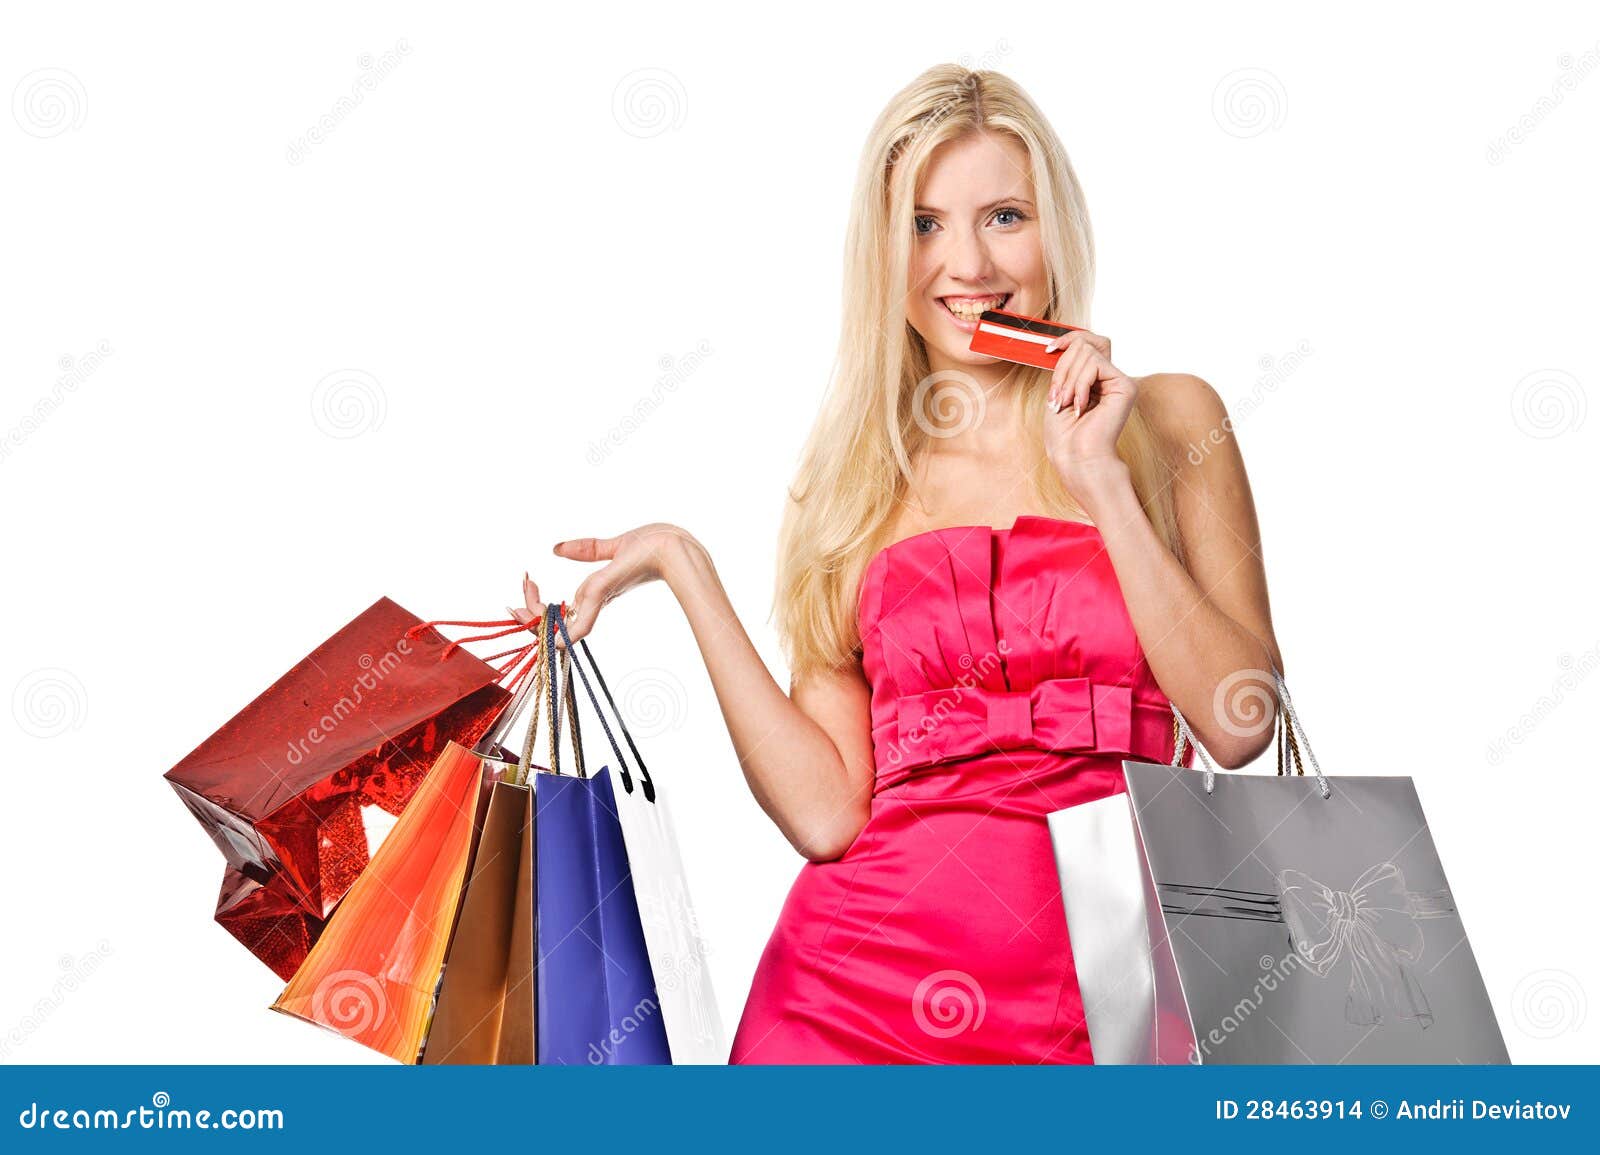 shopaholic. picture of lovely woman with shopping bags